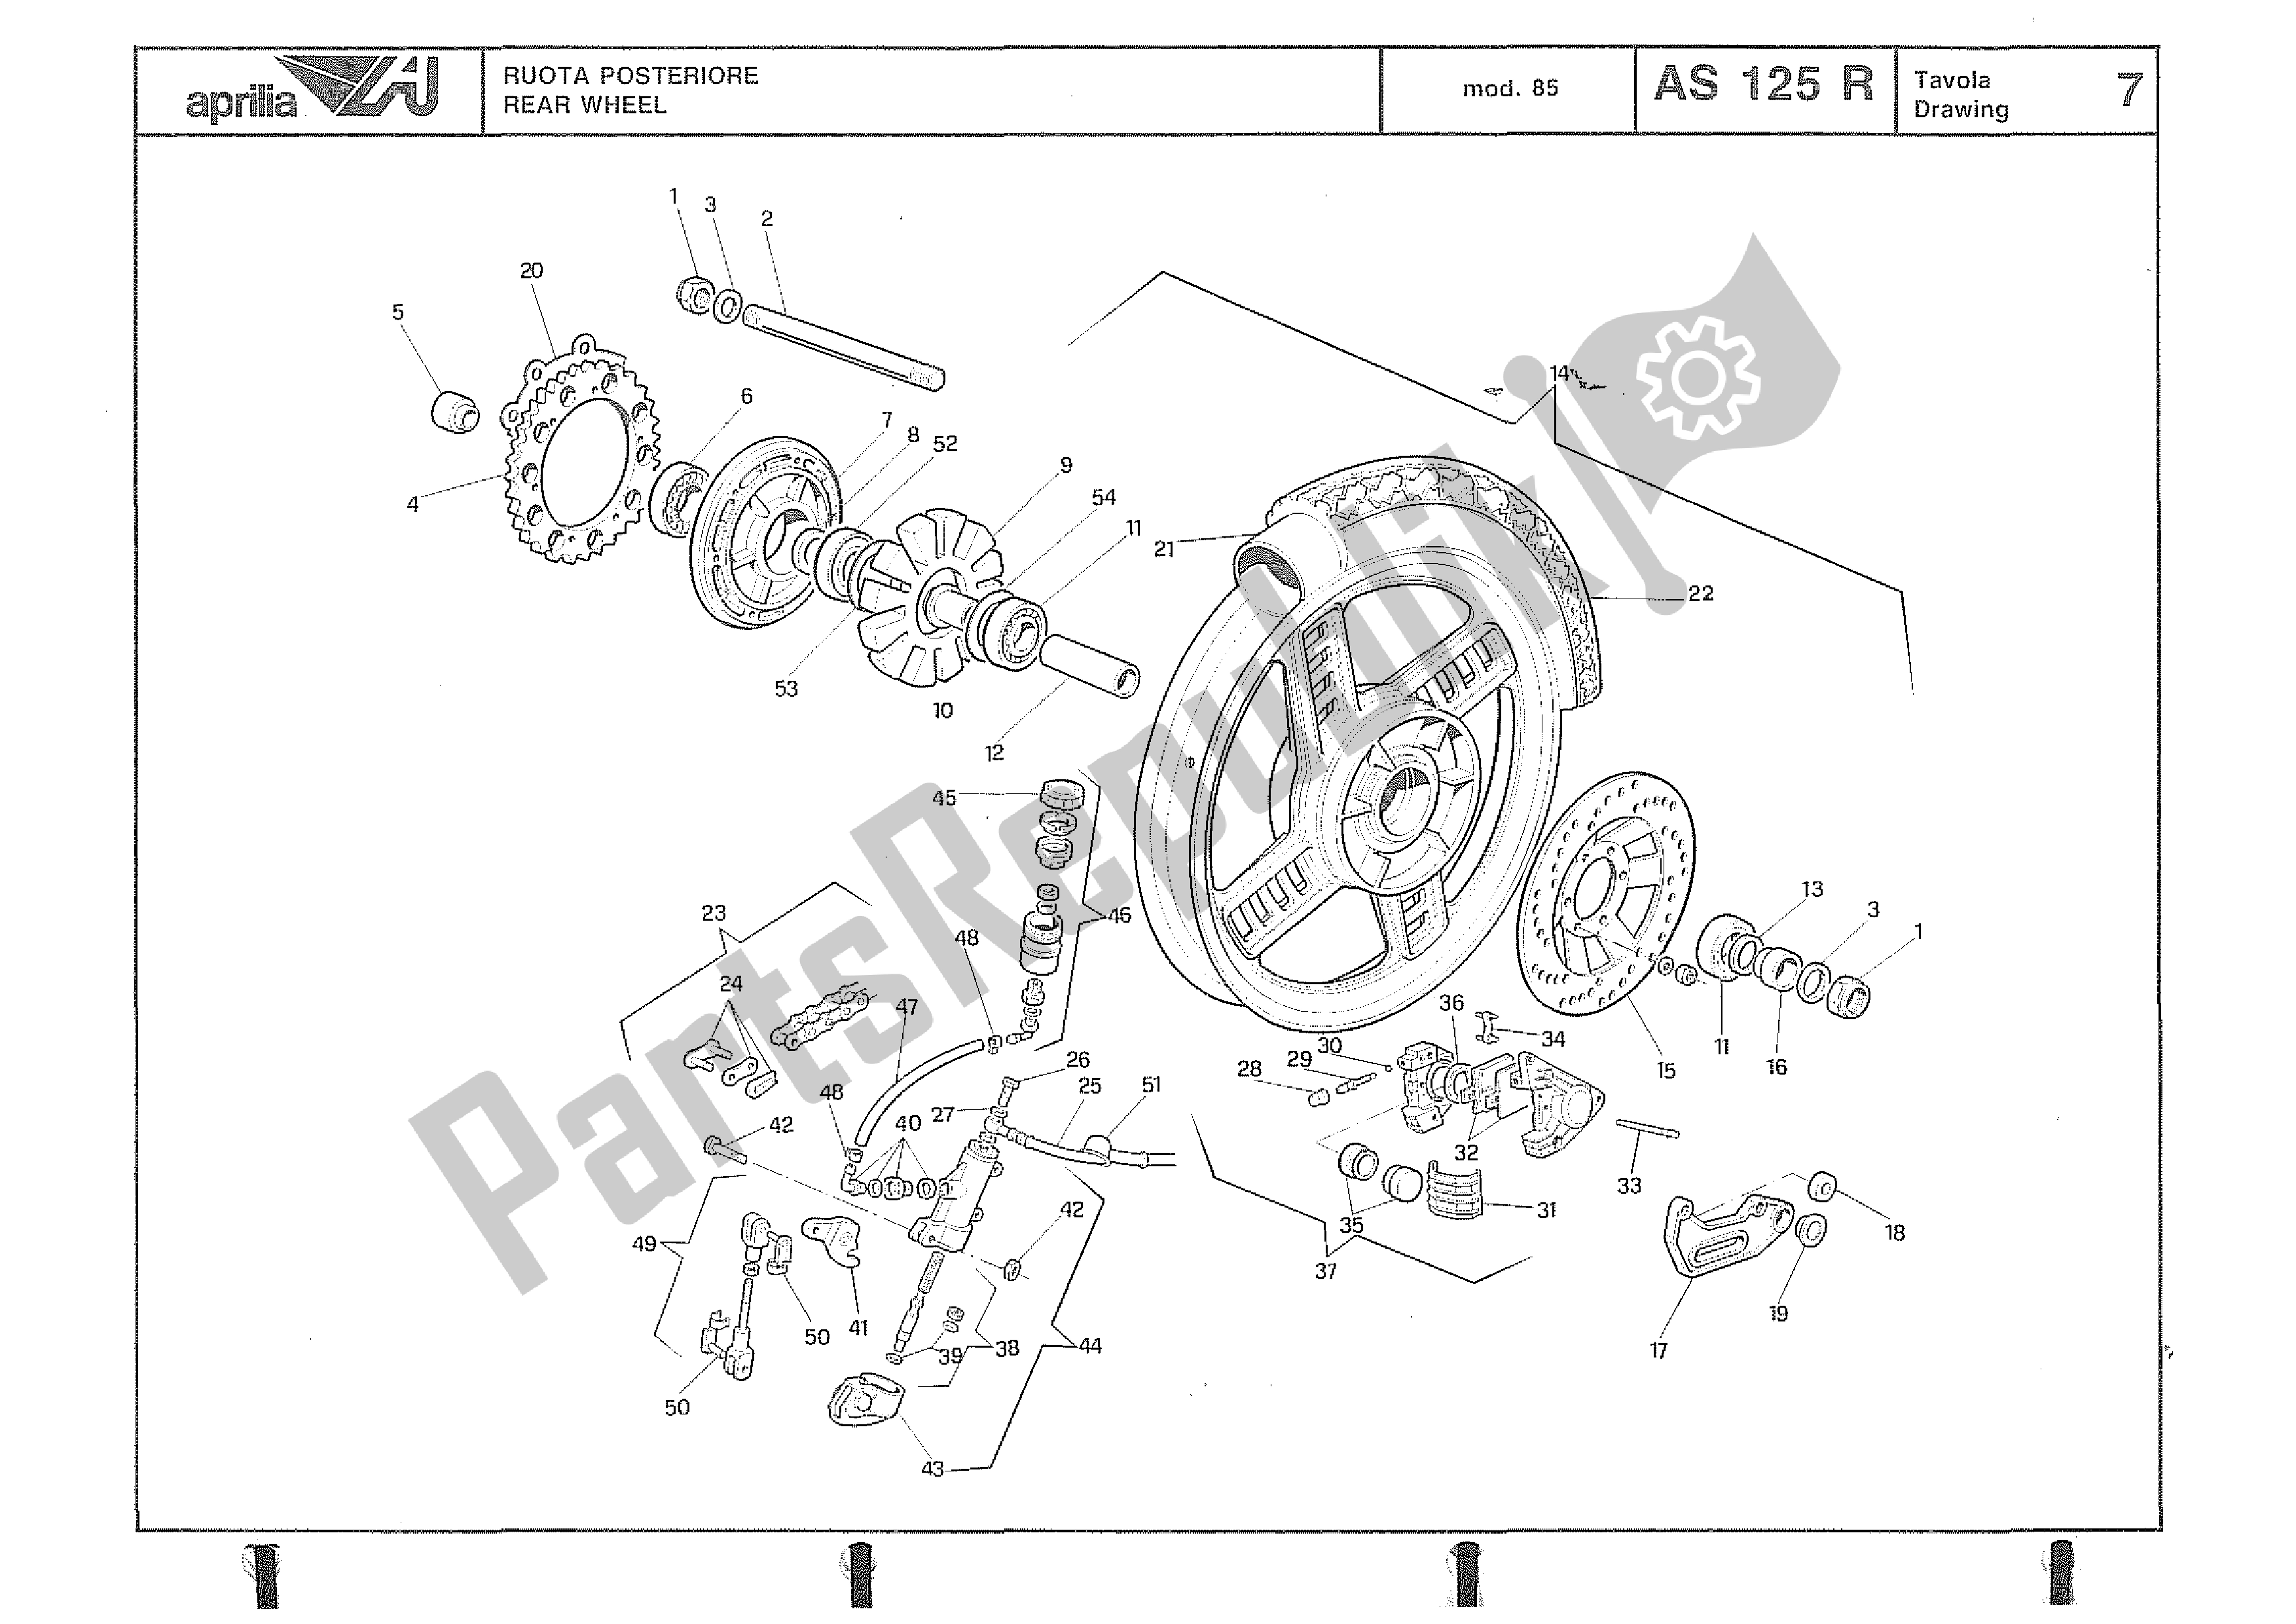 All parts for the Rear Wheel of the Aprilia AS 125 R 1985 - 1987